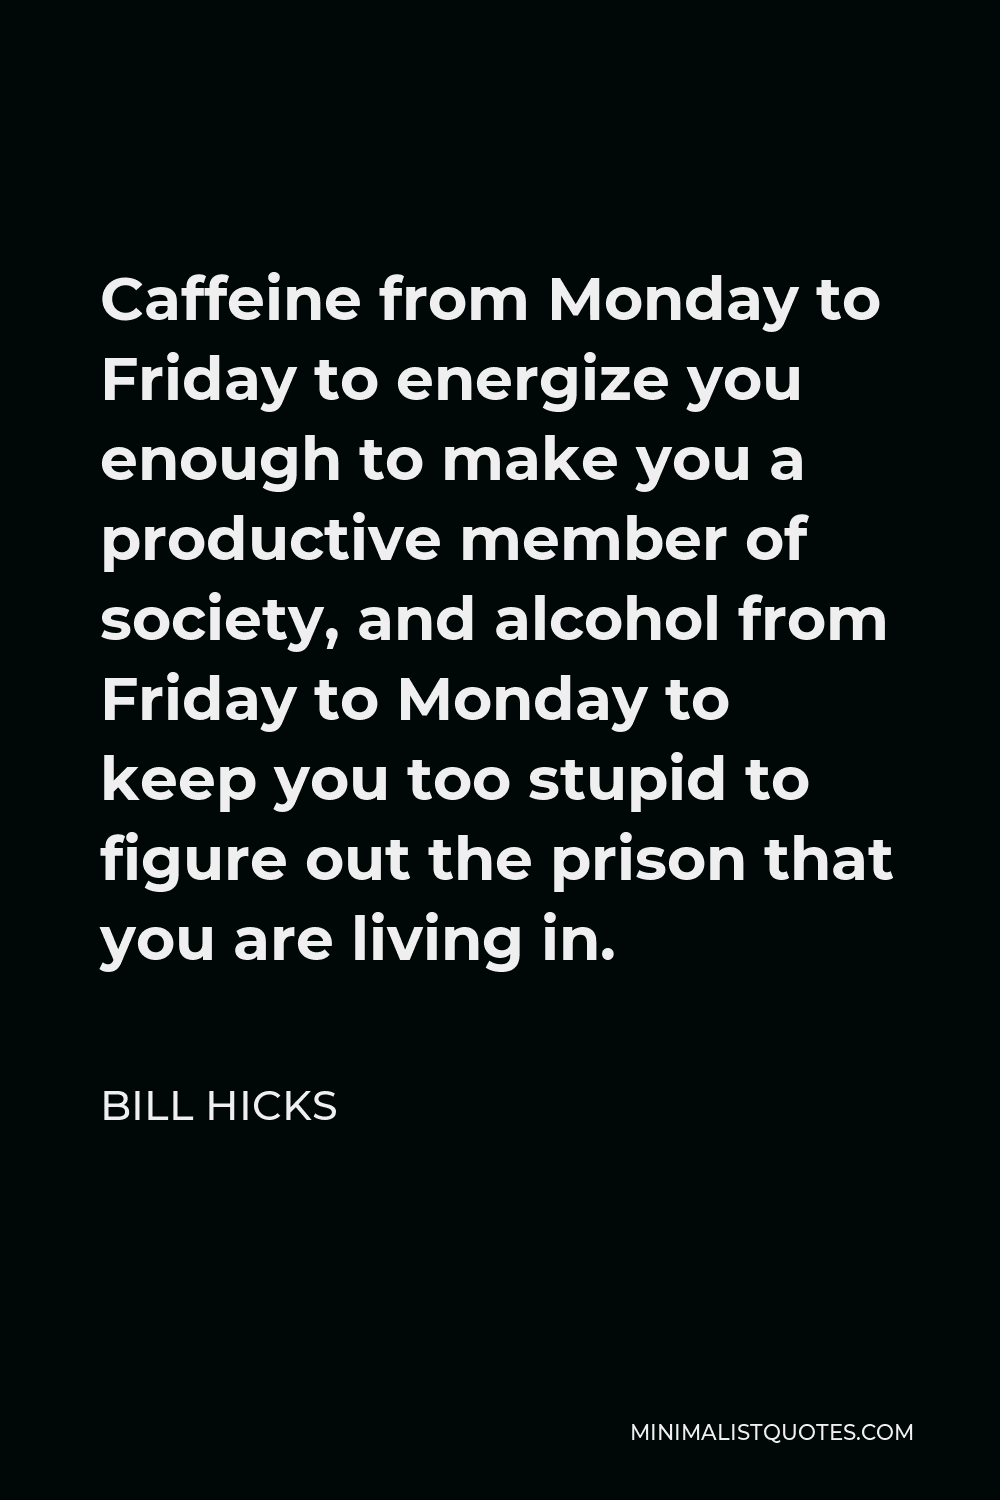 Bill Hicks Quote - Caffeine from Monday to Friday to energize you enough to make you a productive member of society, and alcohol from Friday to Monday to keep you too stupid to figure out the prison that you are living in.